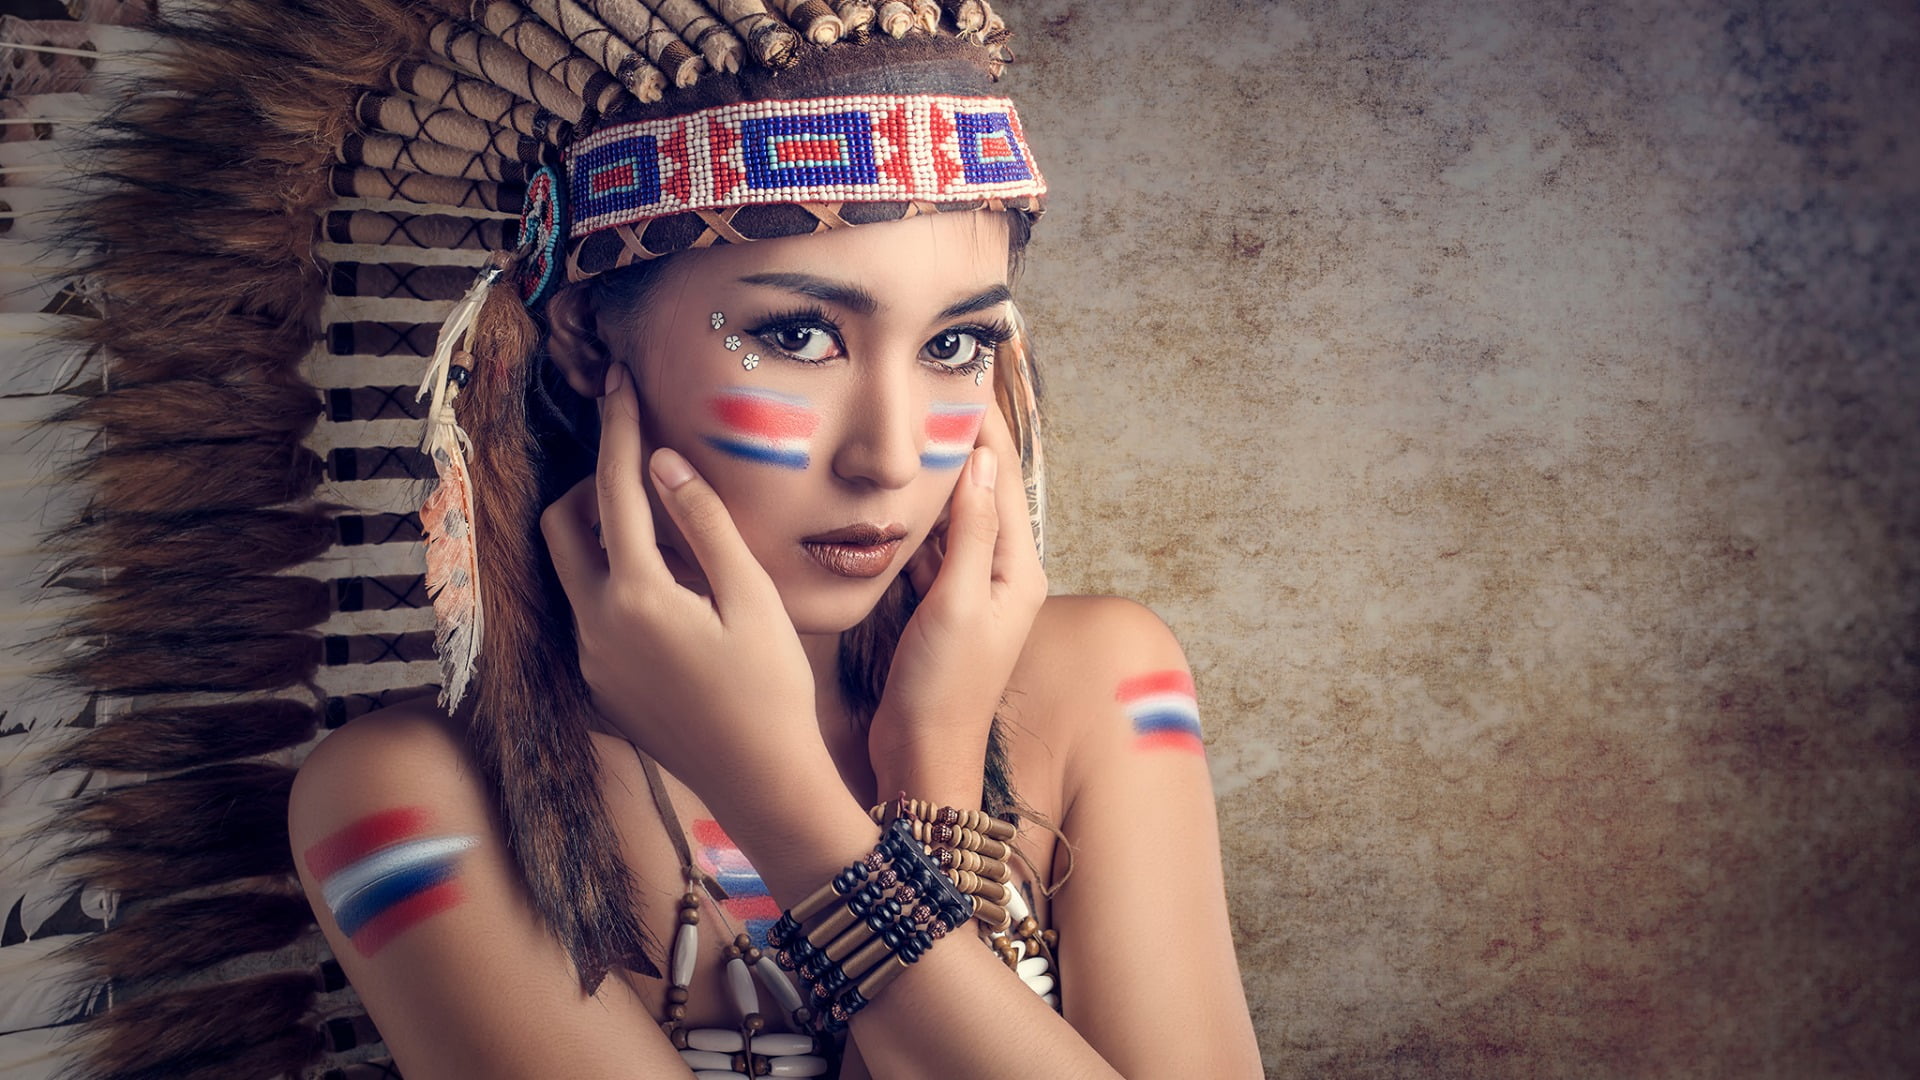 women, model, photography, people, Asian, Native American clothing